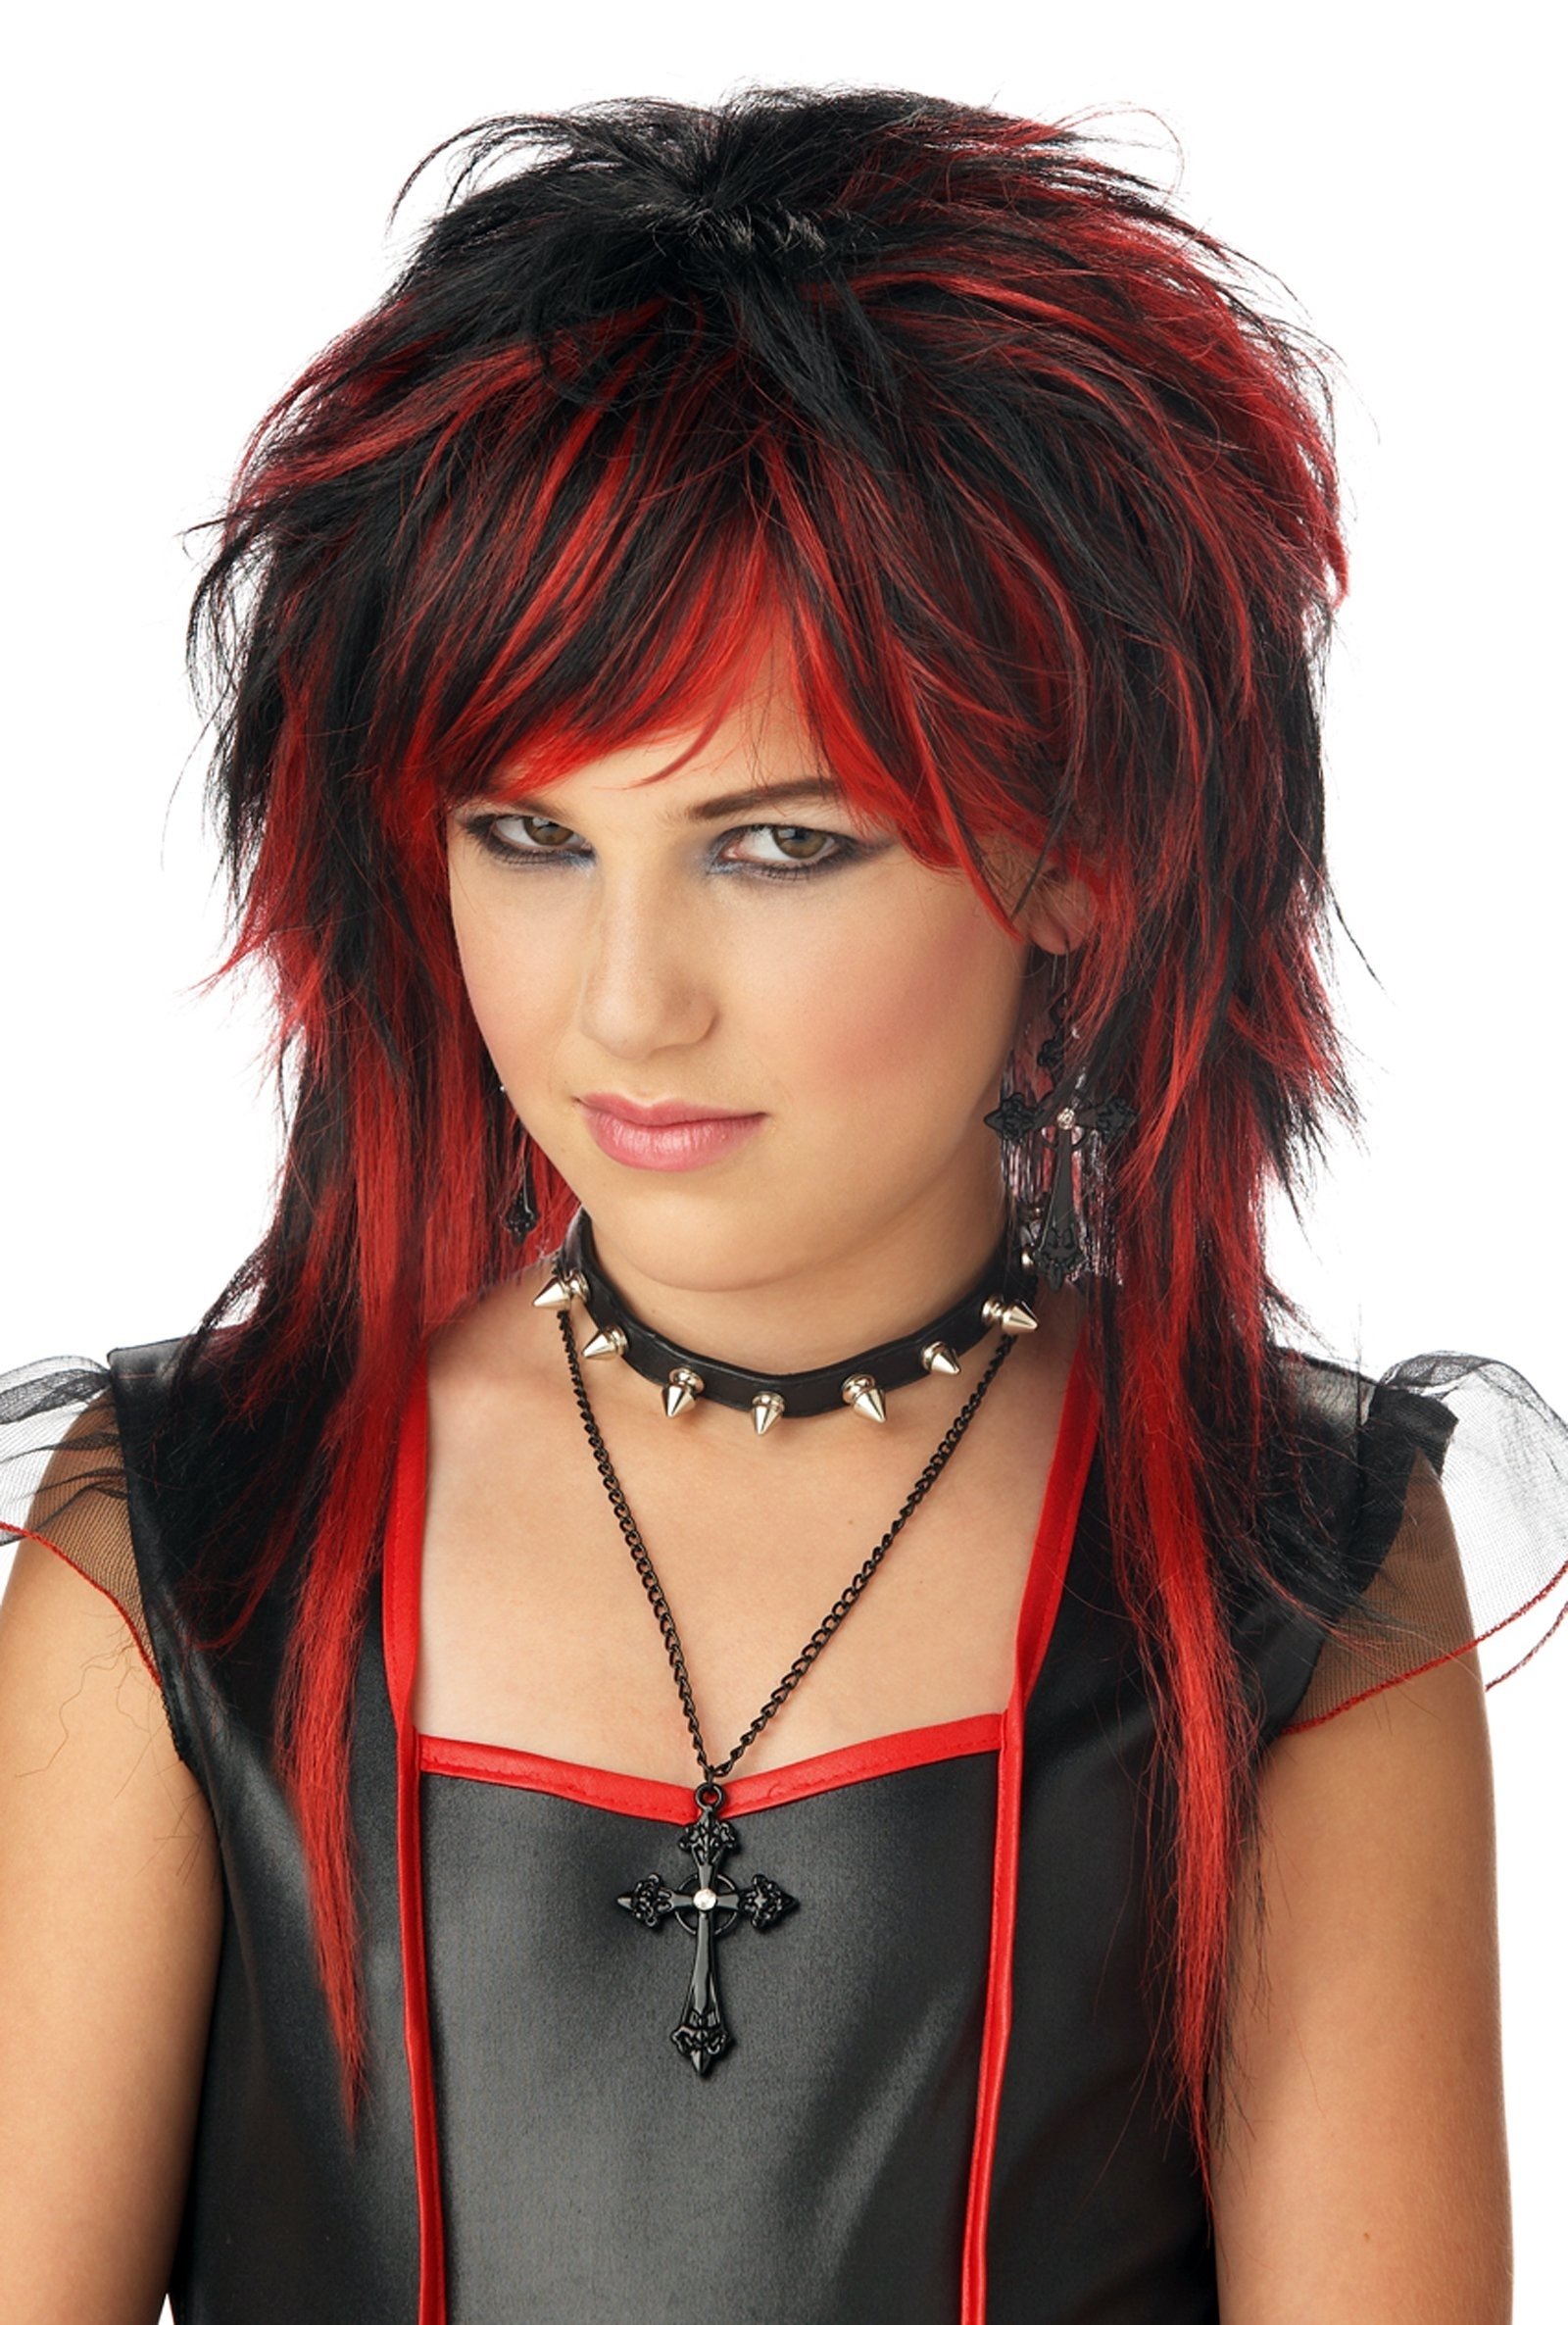 10 Amazing Black And Red Hair Ideas hair color red and black hair colors idea in 2018 2022